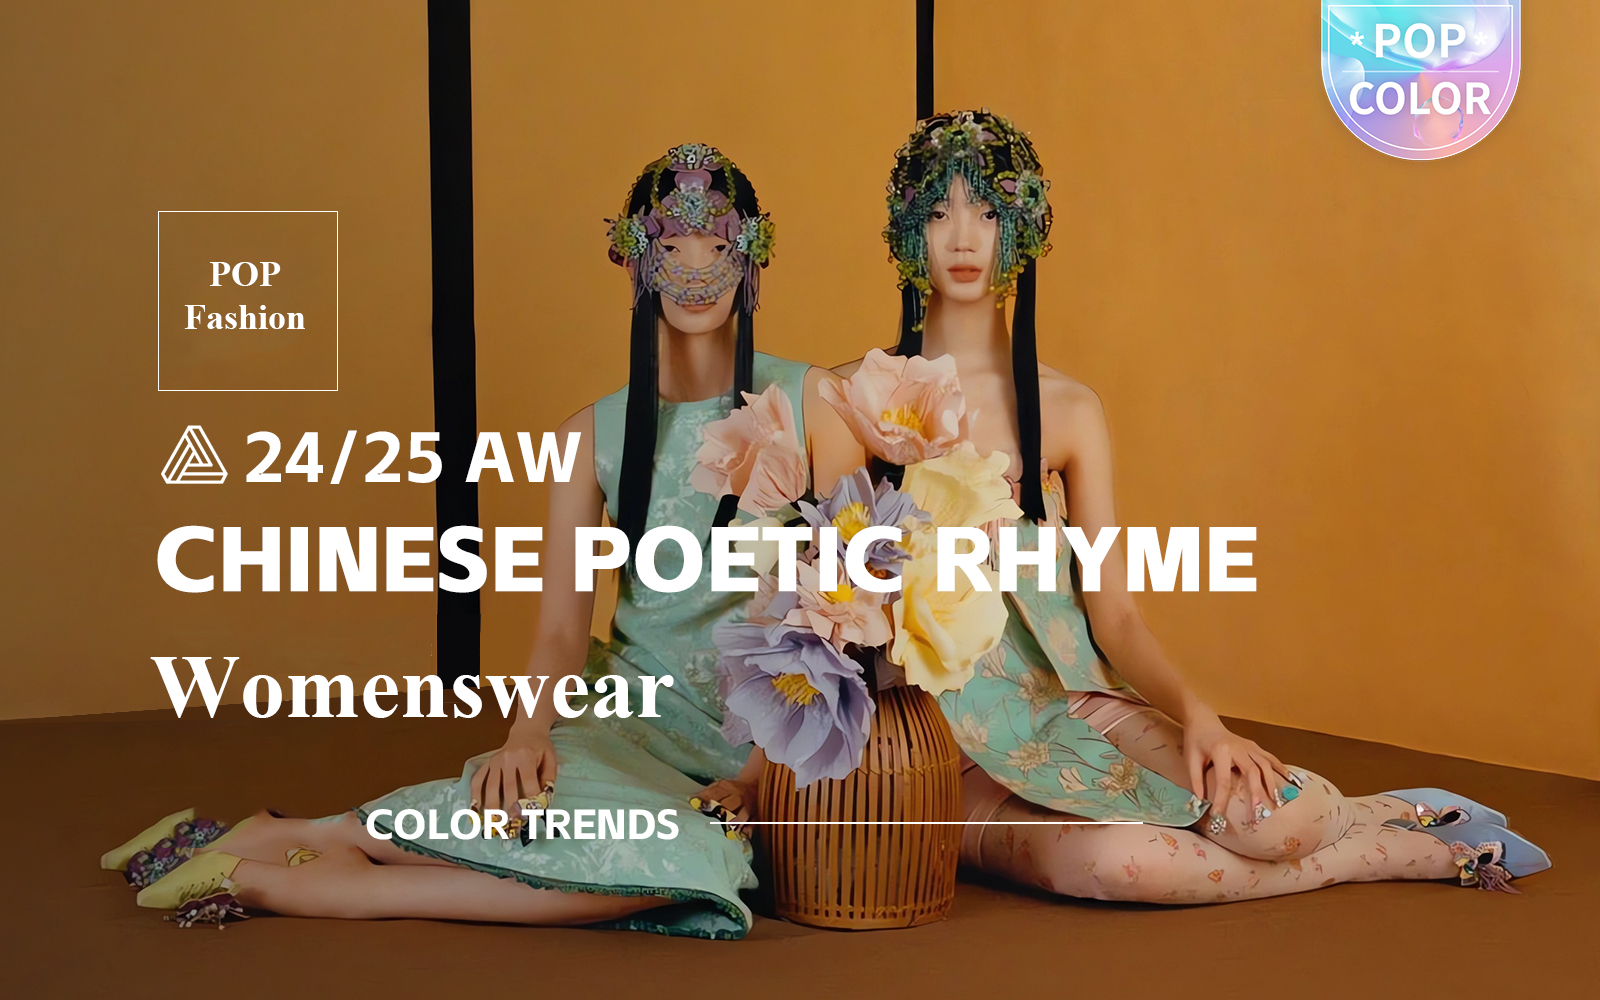 Chinese Poetic Rhyme -- The Color Trend for Womenswear